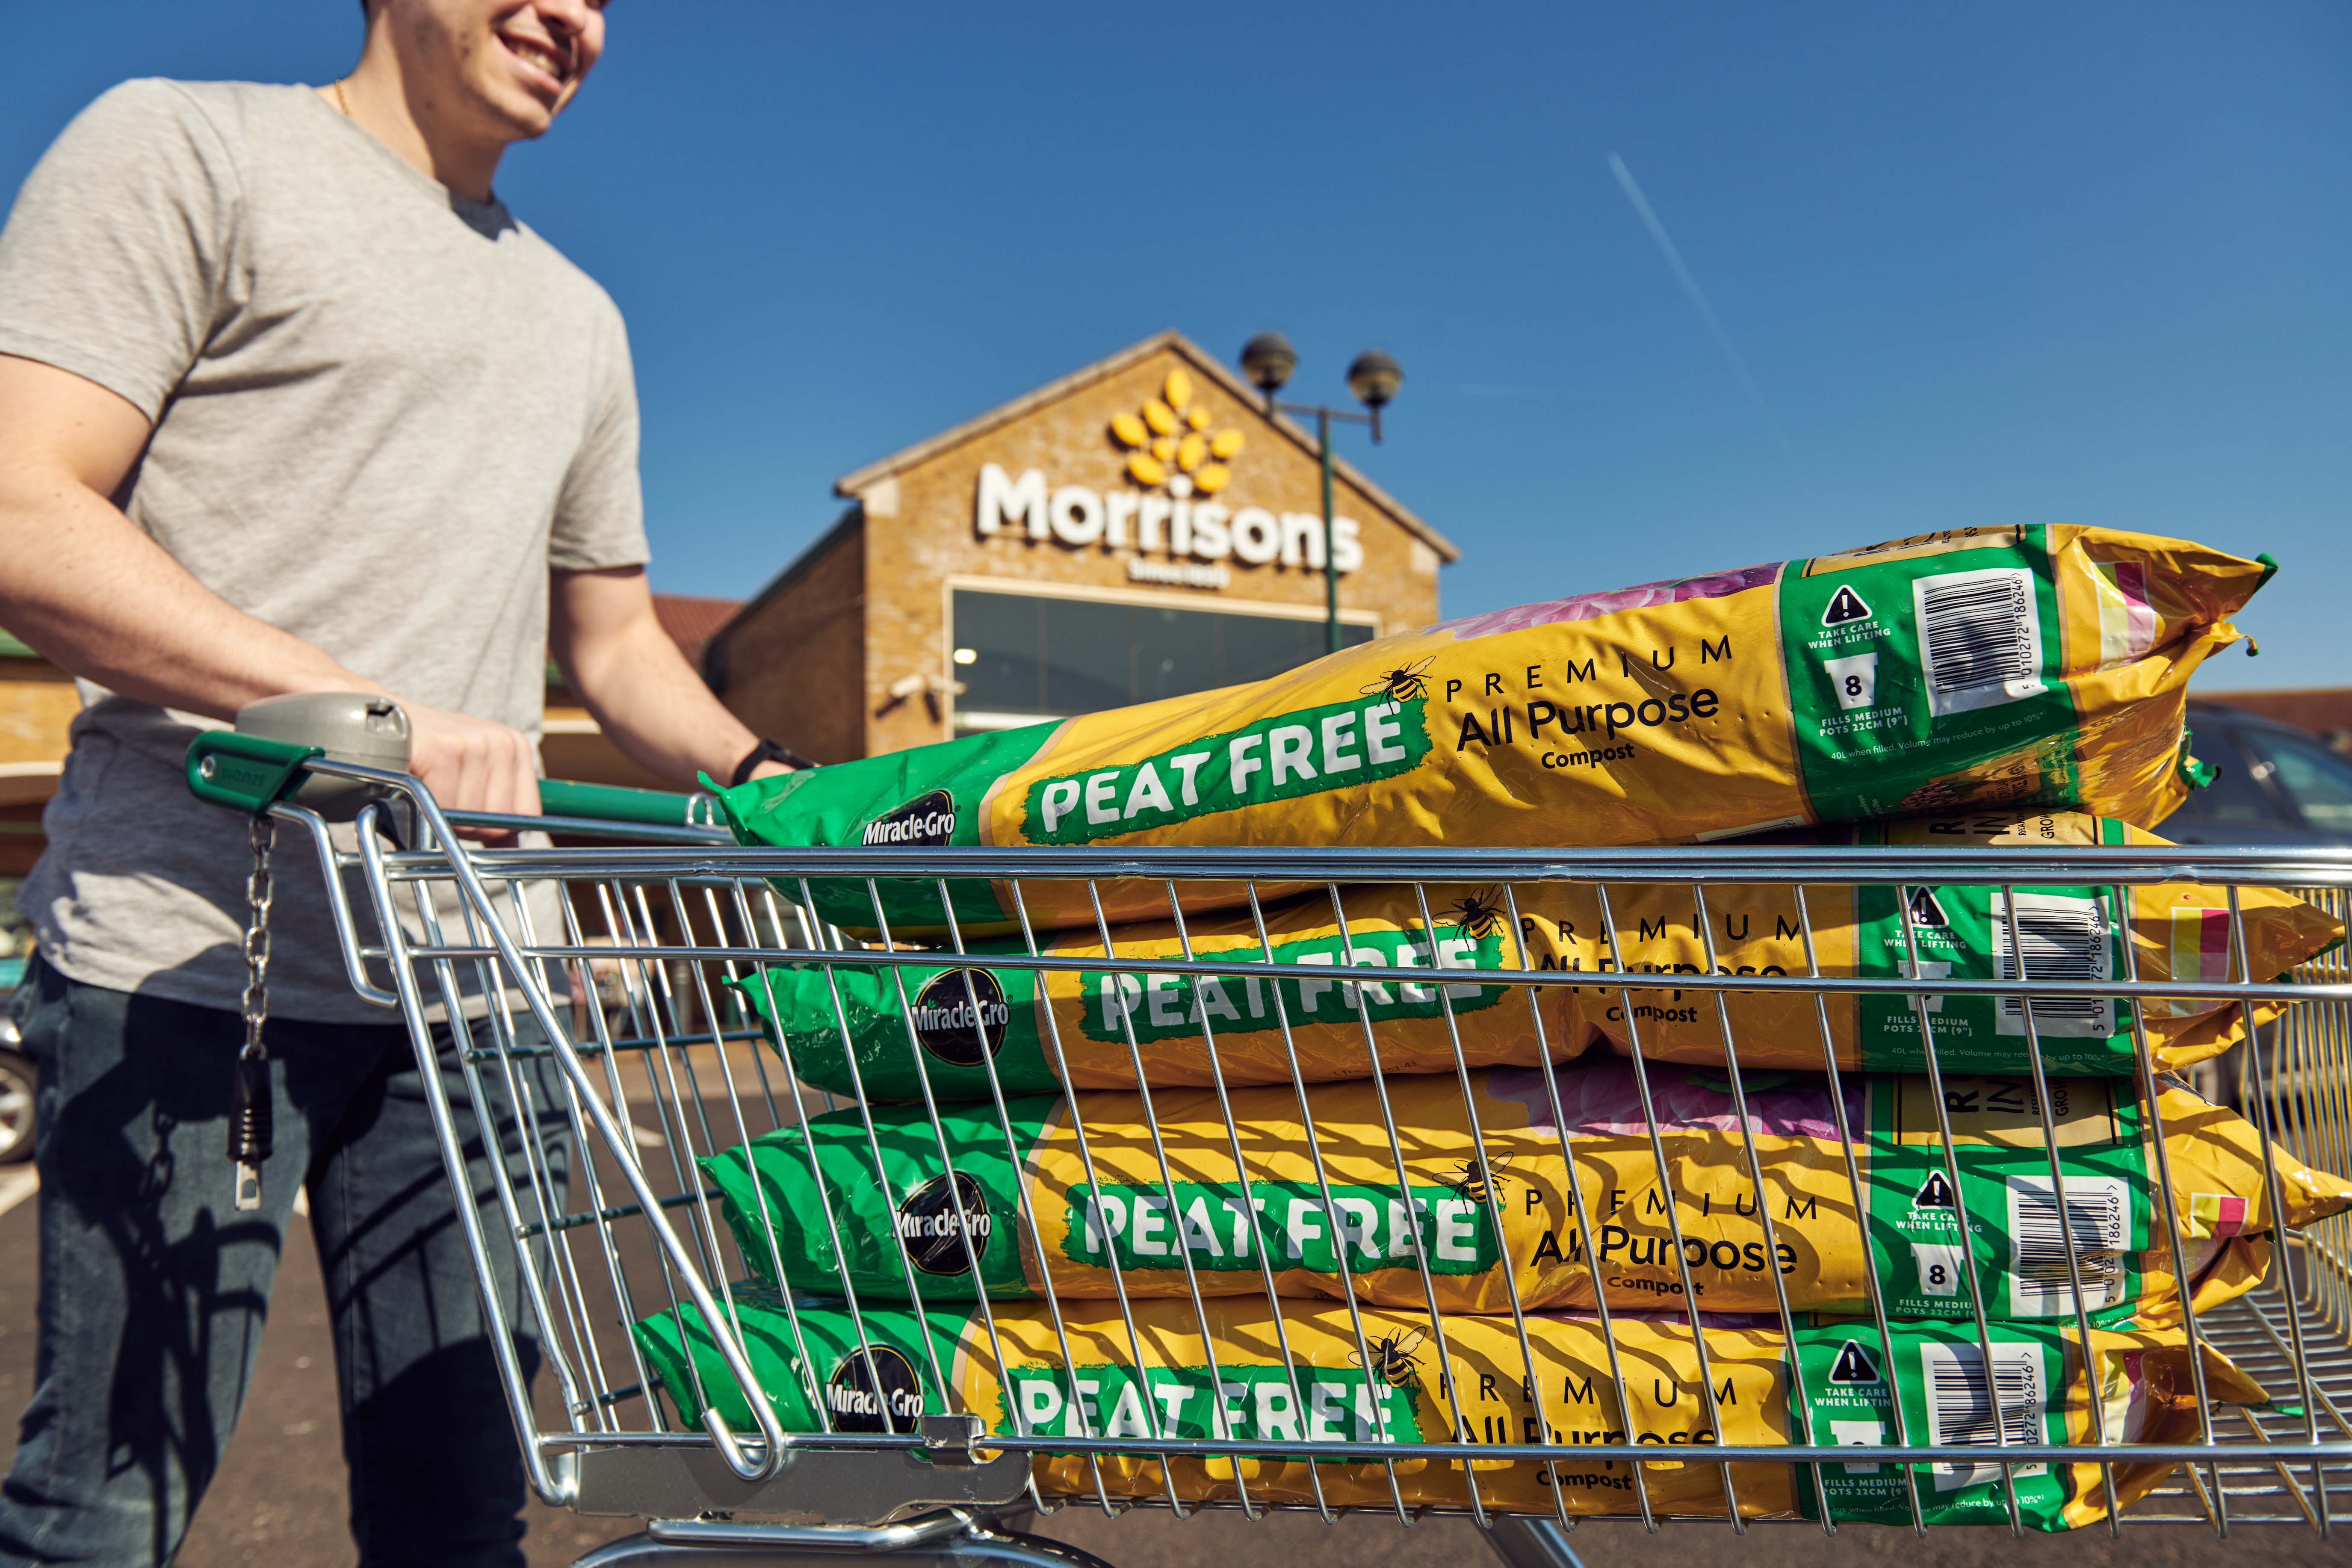 Morrisons to switch to 100% peat-free compost